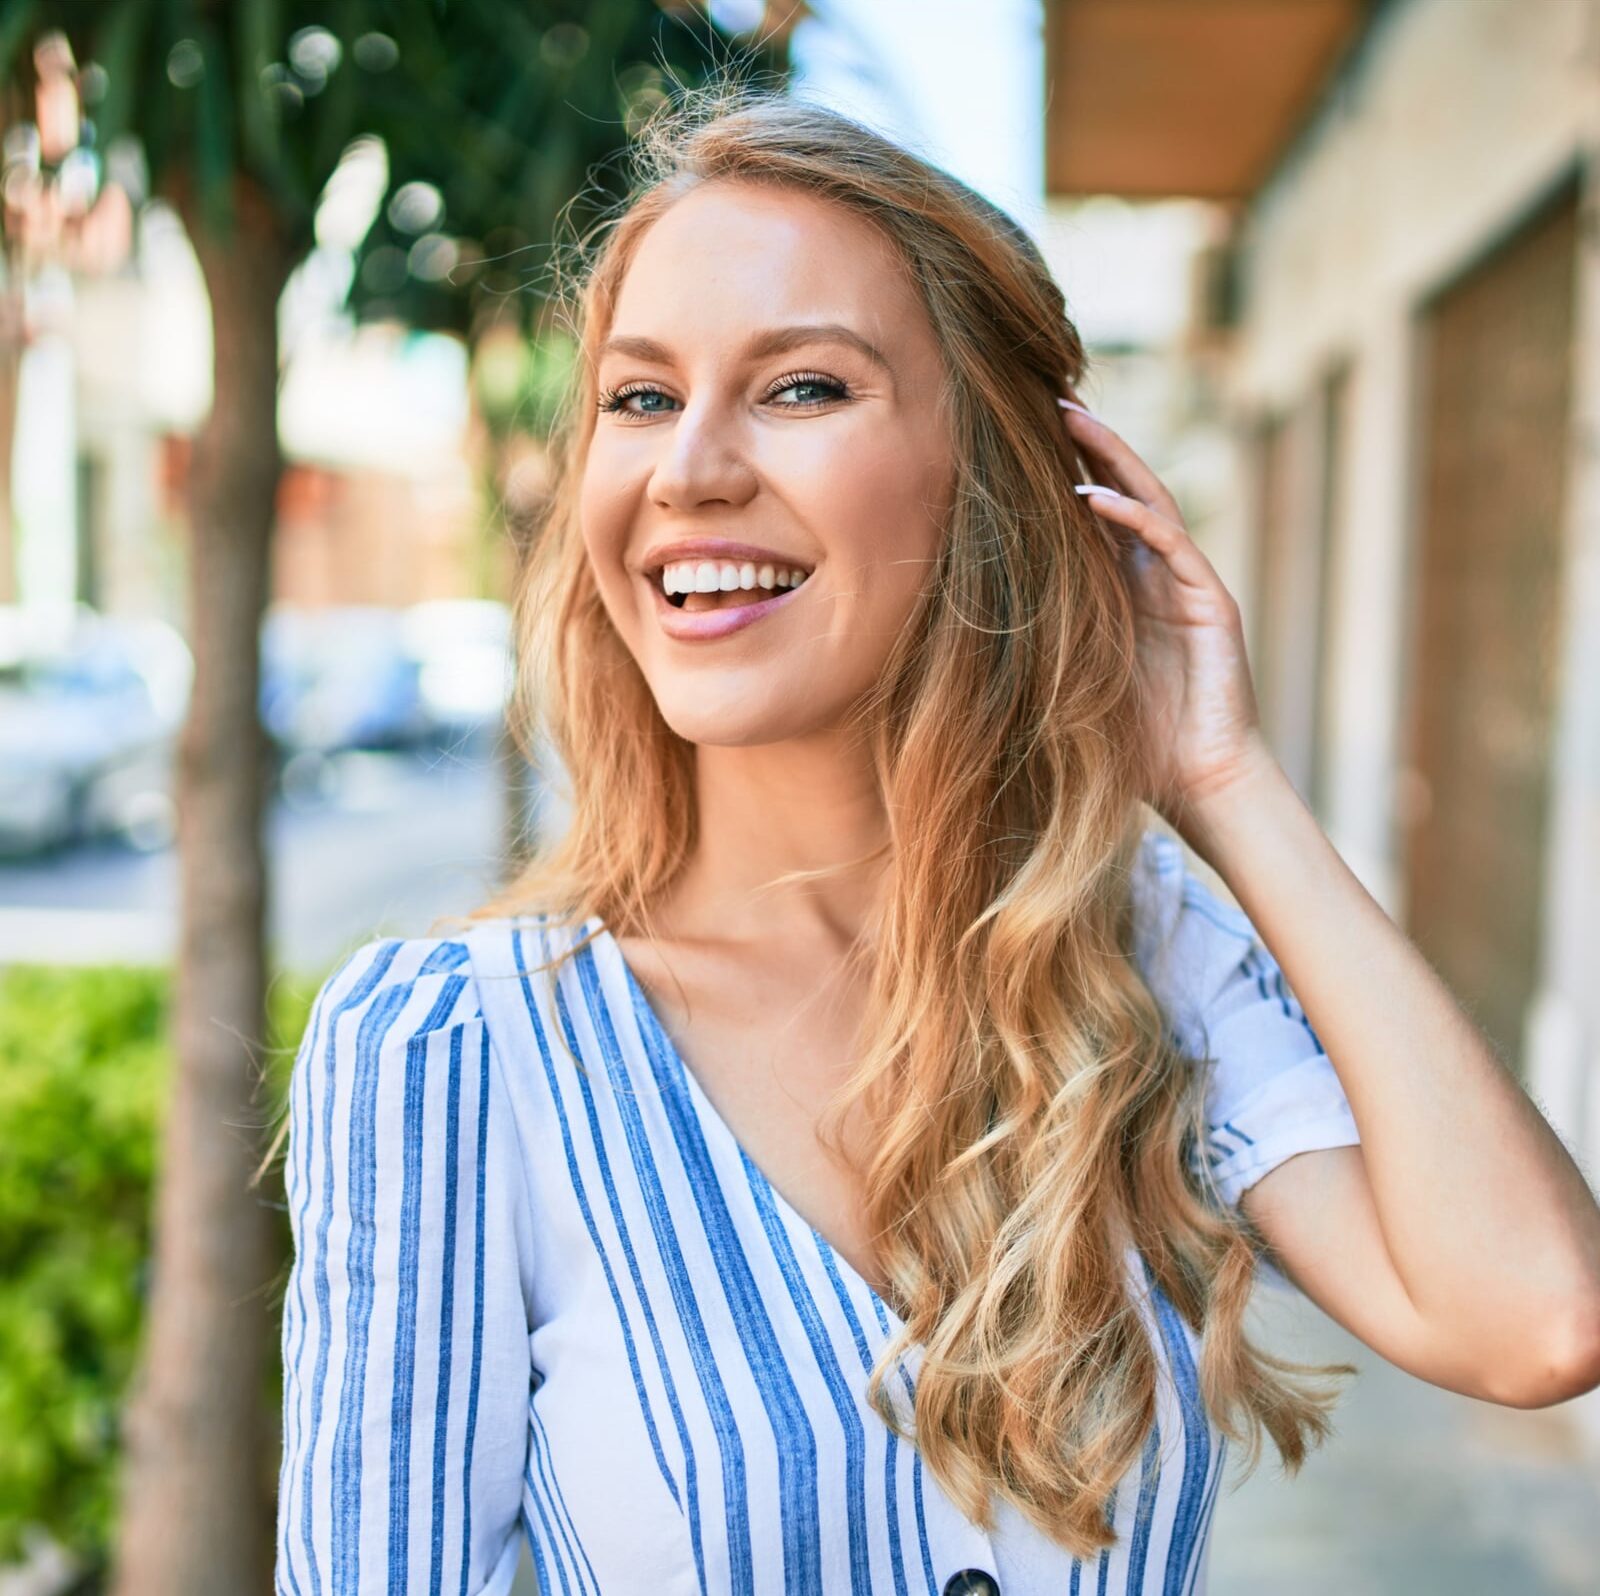 Young beautiful caucasian woman with blond hair smiling